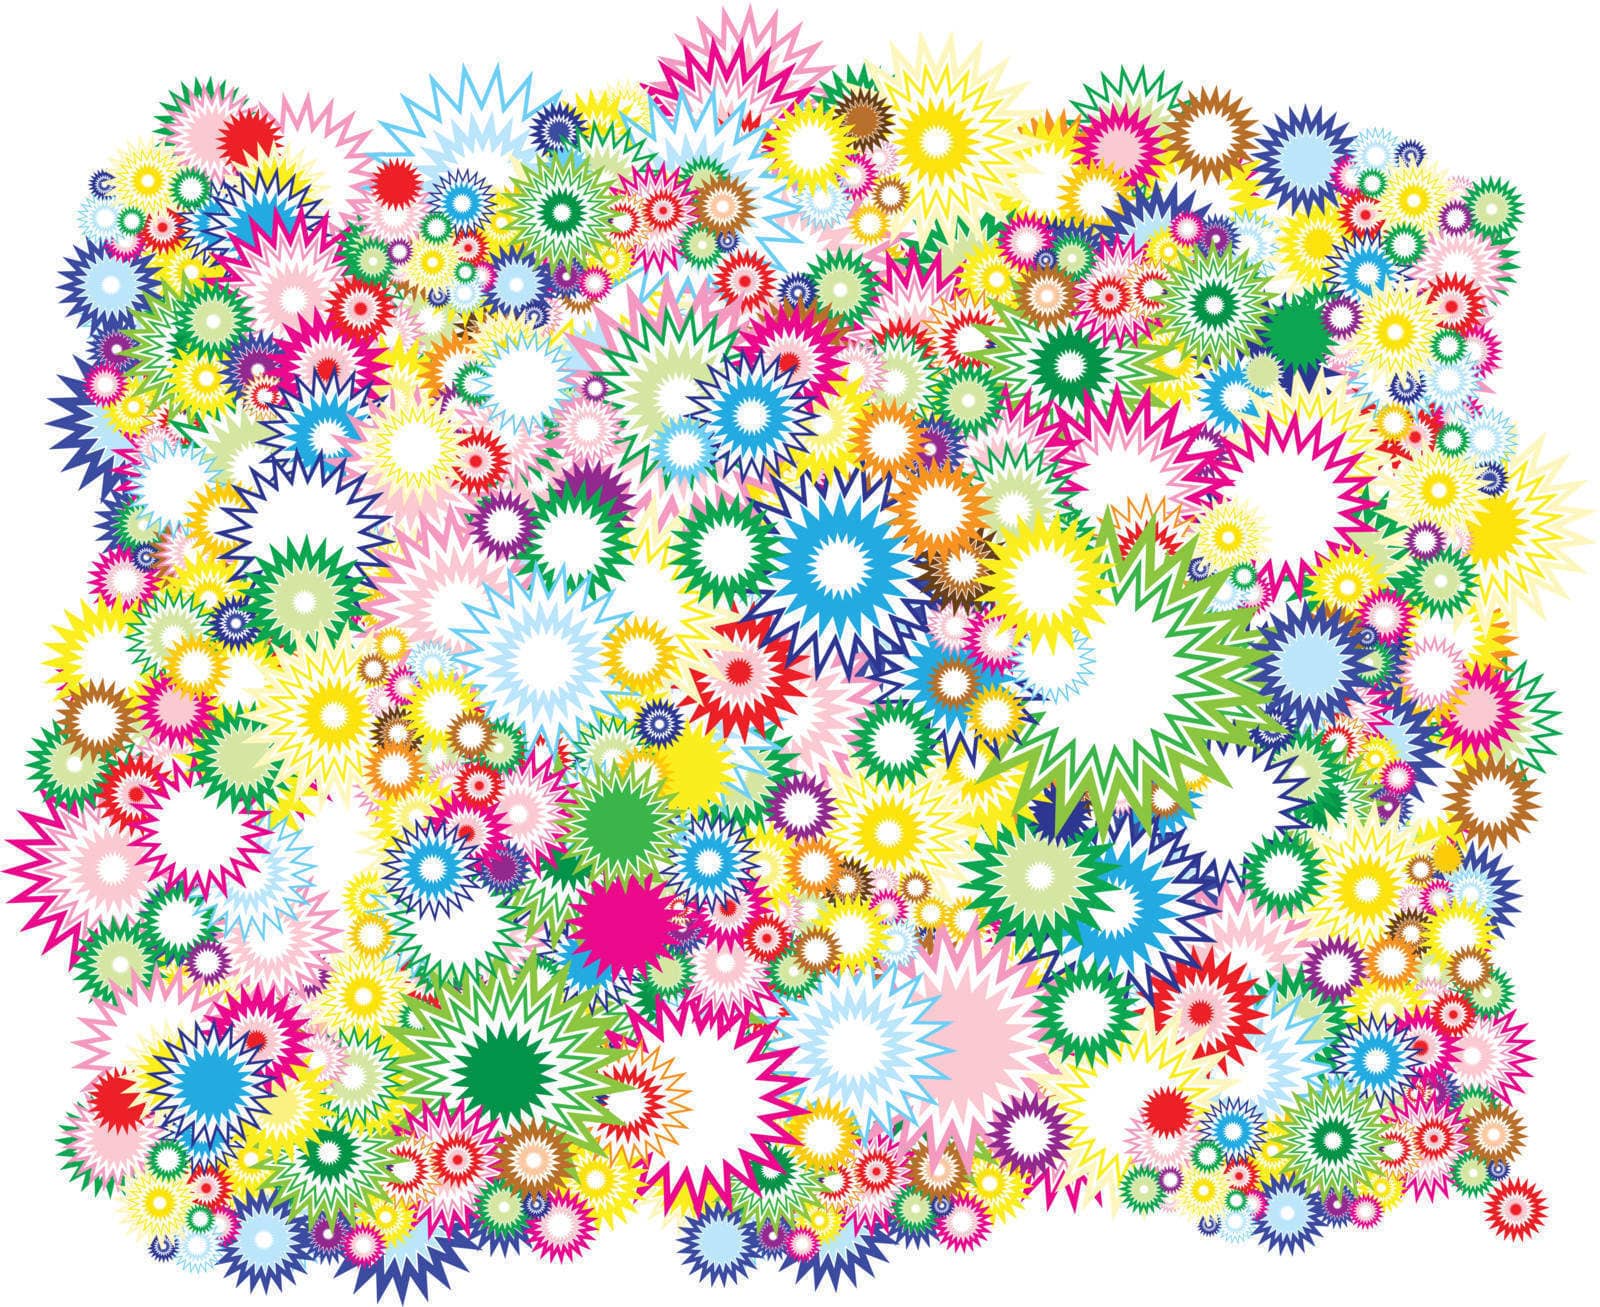 Vivid circles background  by orson